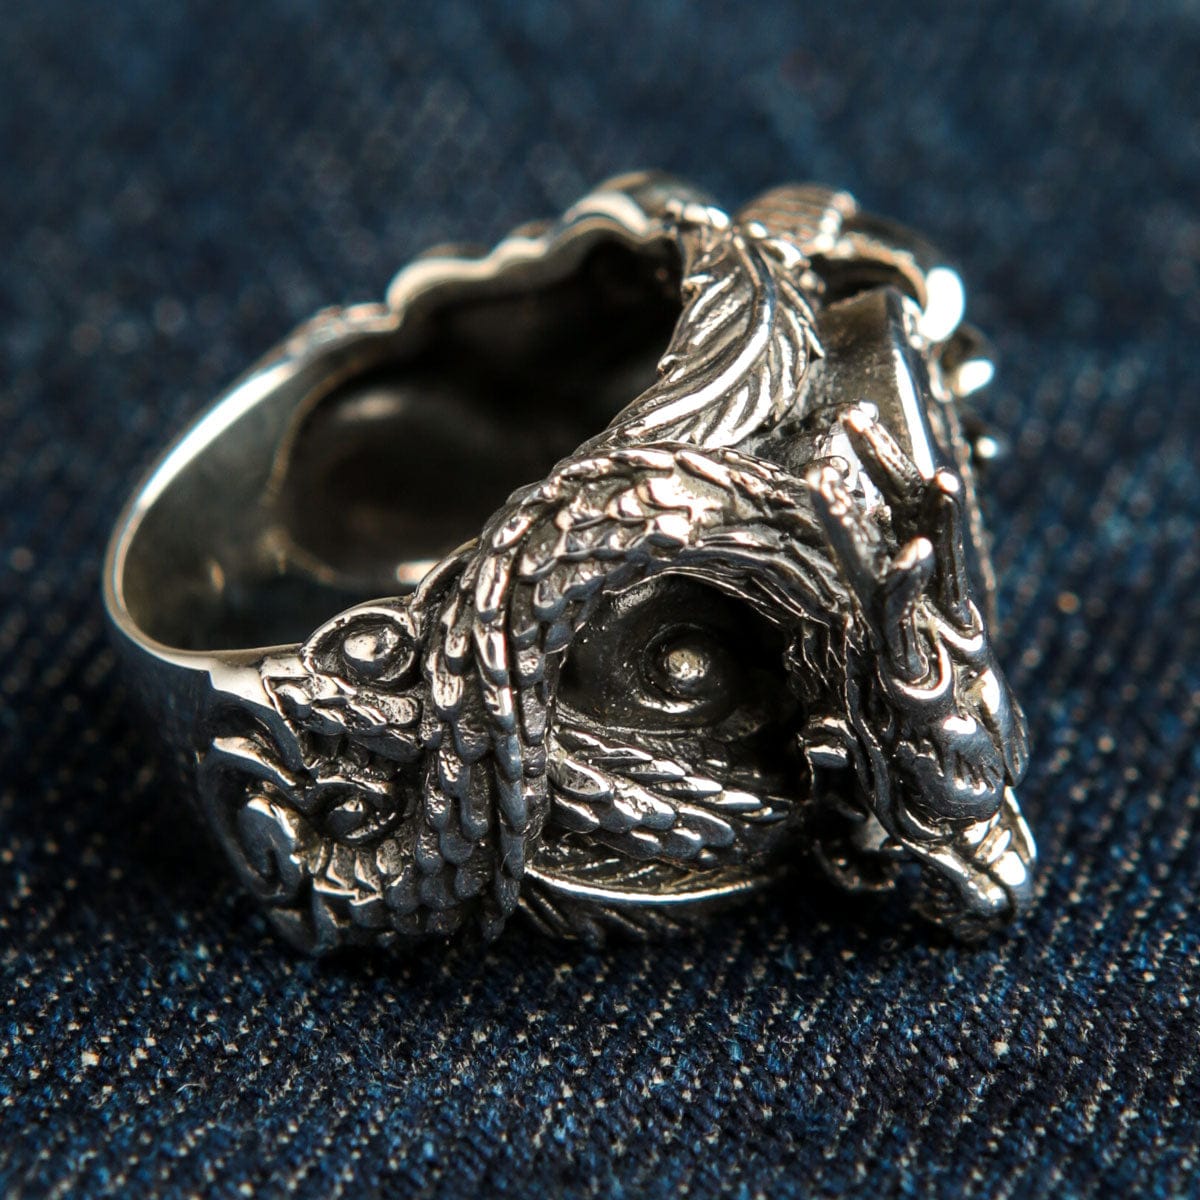 Buy Sterling Silver Dragon Ring, Chinese Dragon, Animal Ring, Fire, Gypsy,  Festival Jewelry, Adjustable, Renaissance, Outfit Online in India - Etsy